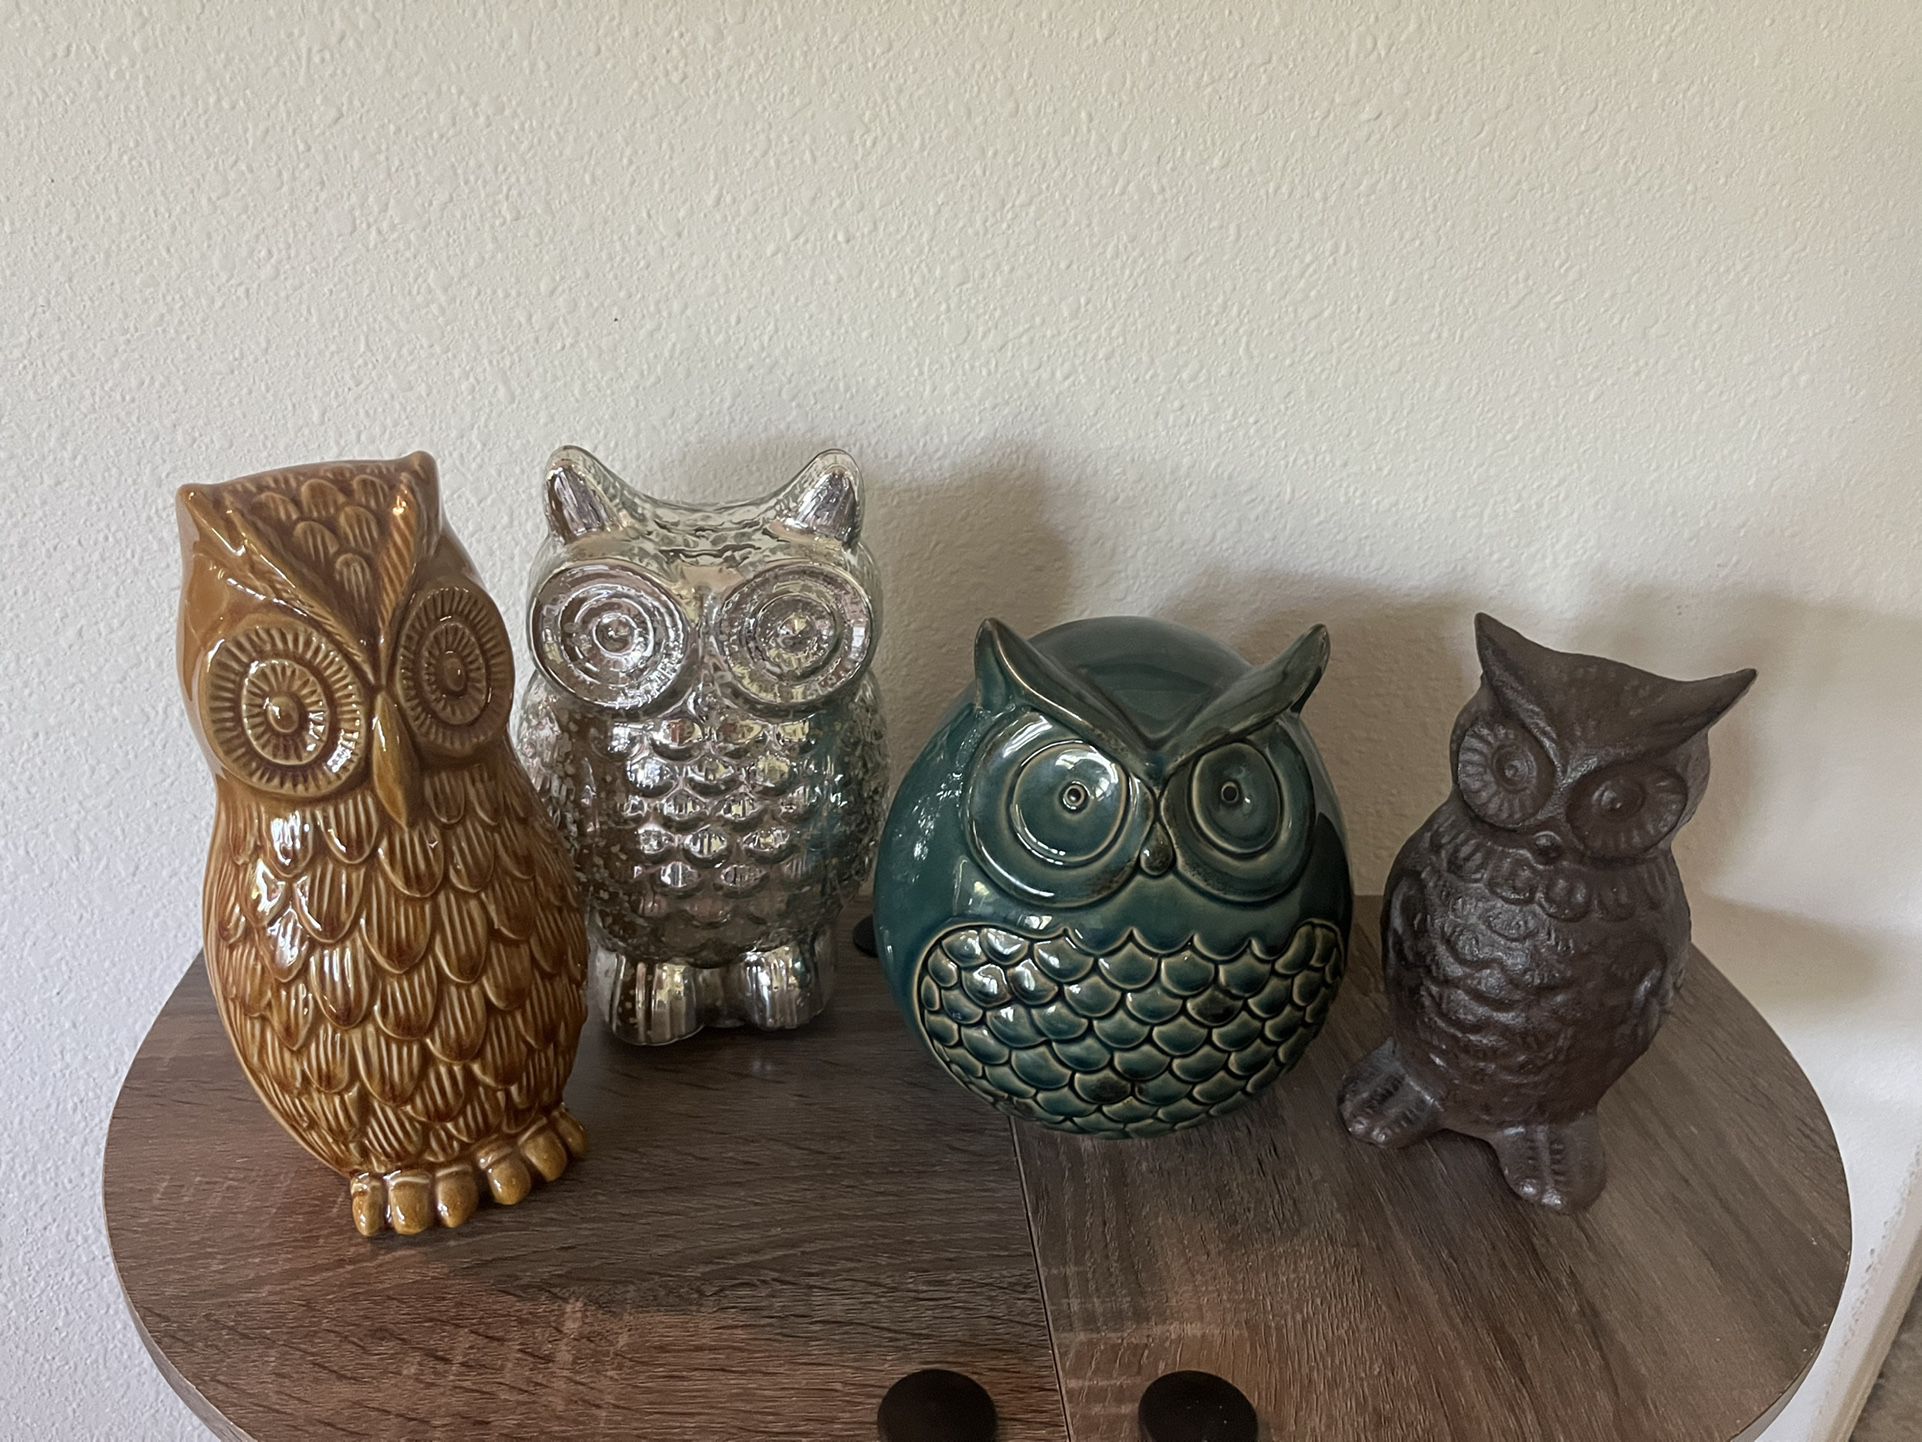 Owls 12 Each - silver One SOLD - Lots More Decor Available 